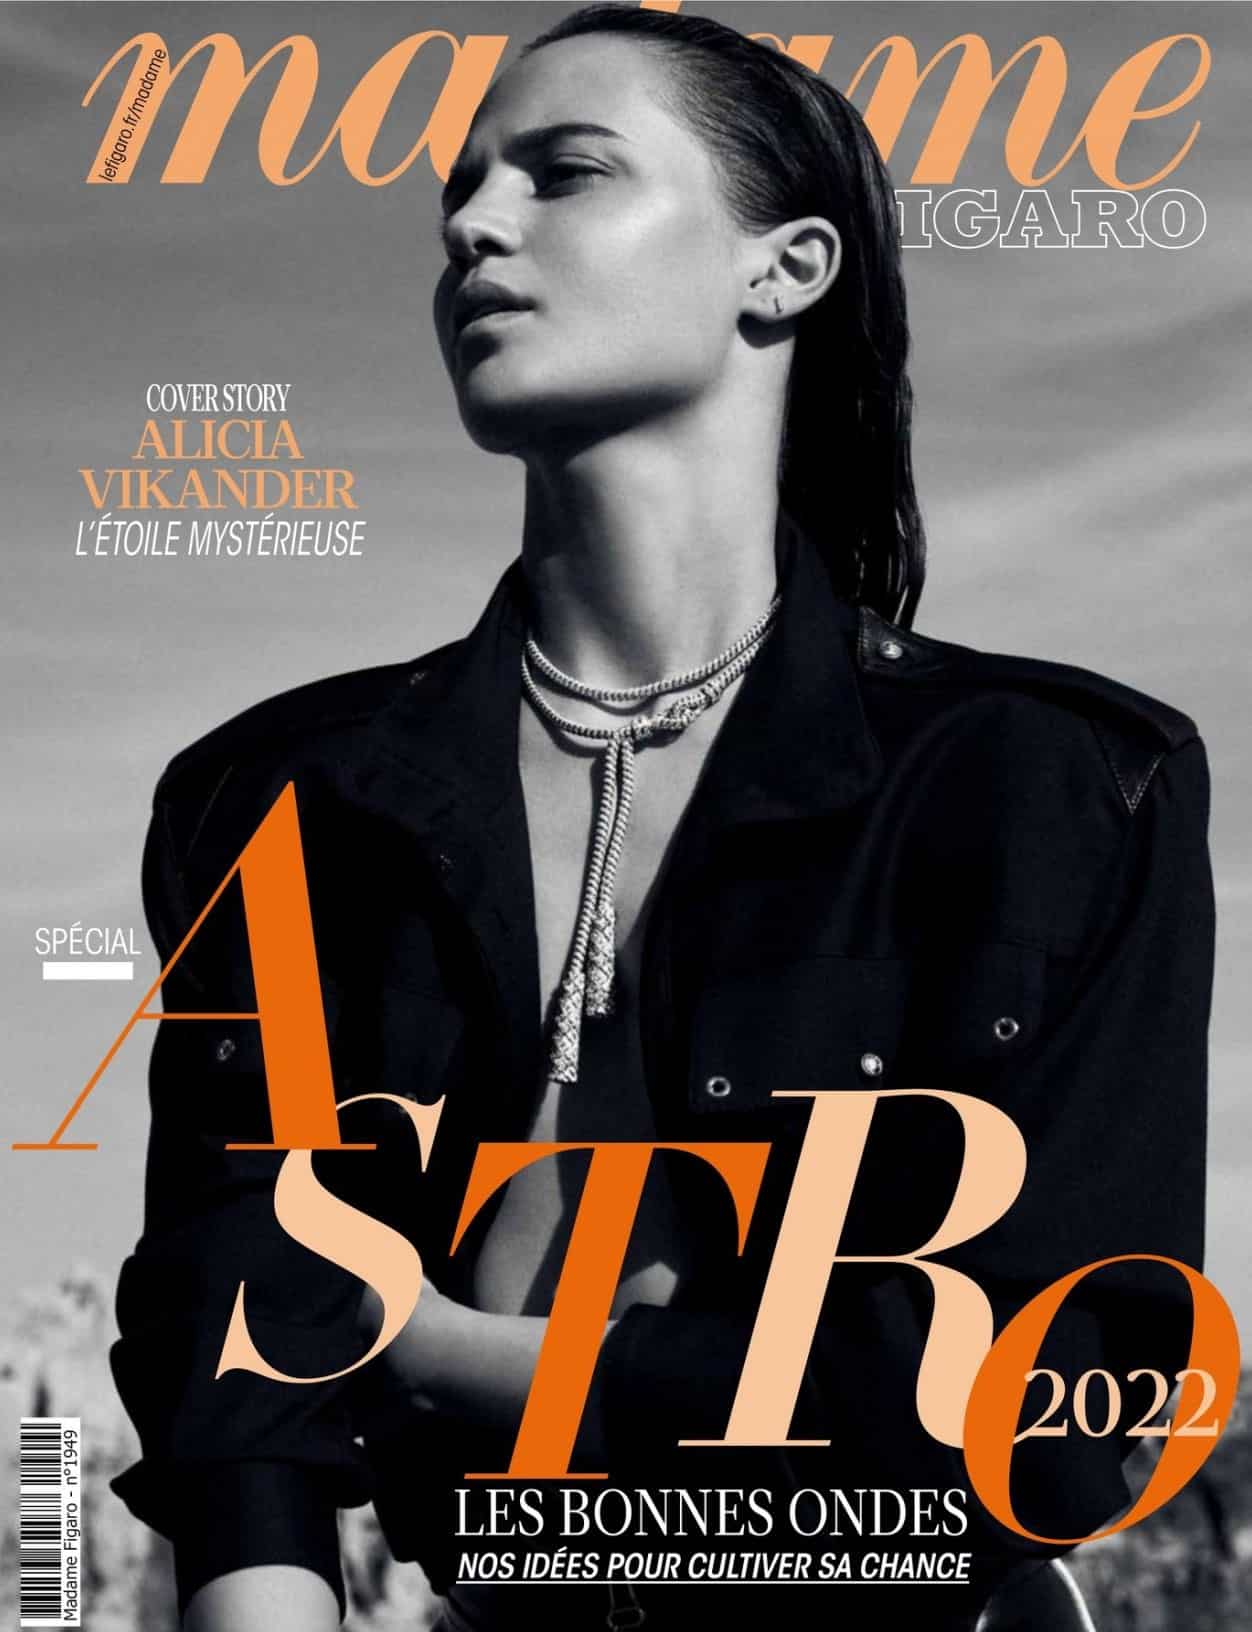 Alicia Vikander on the Cover of Madame Figaro December 2021 Issue